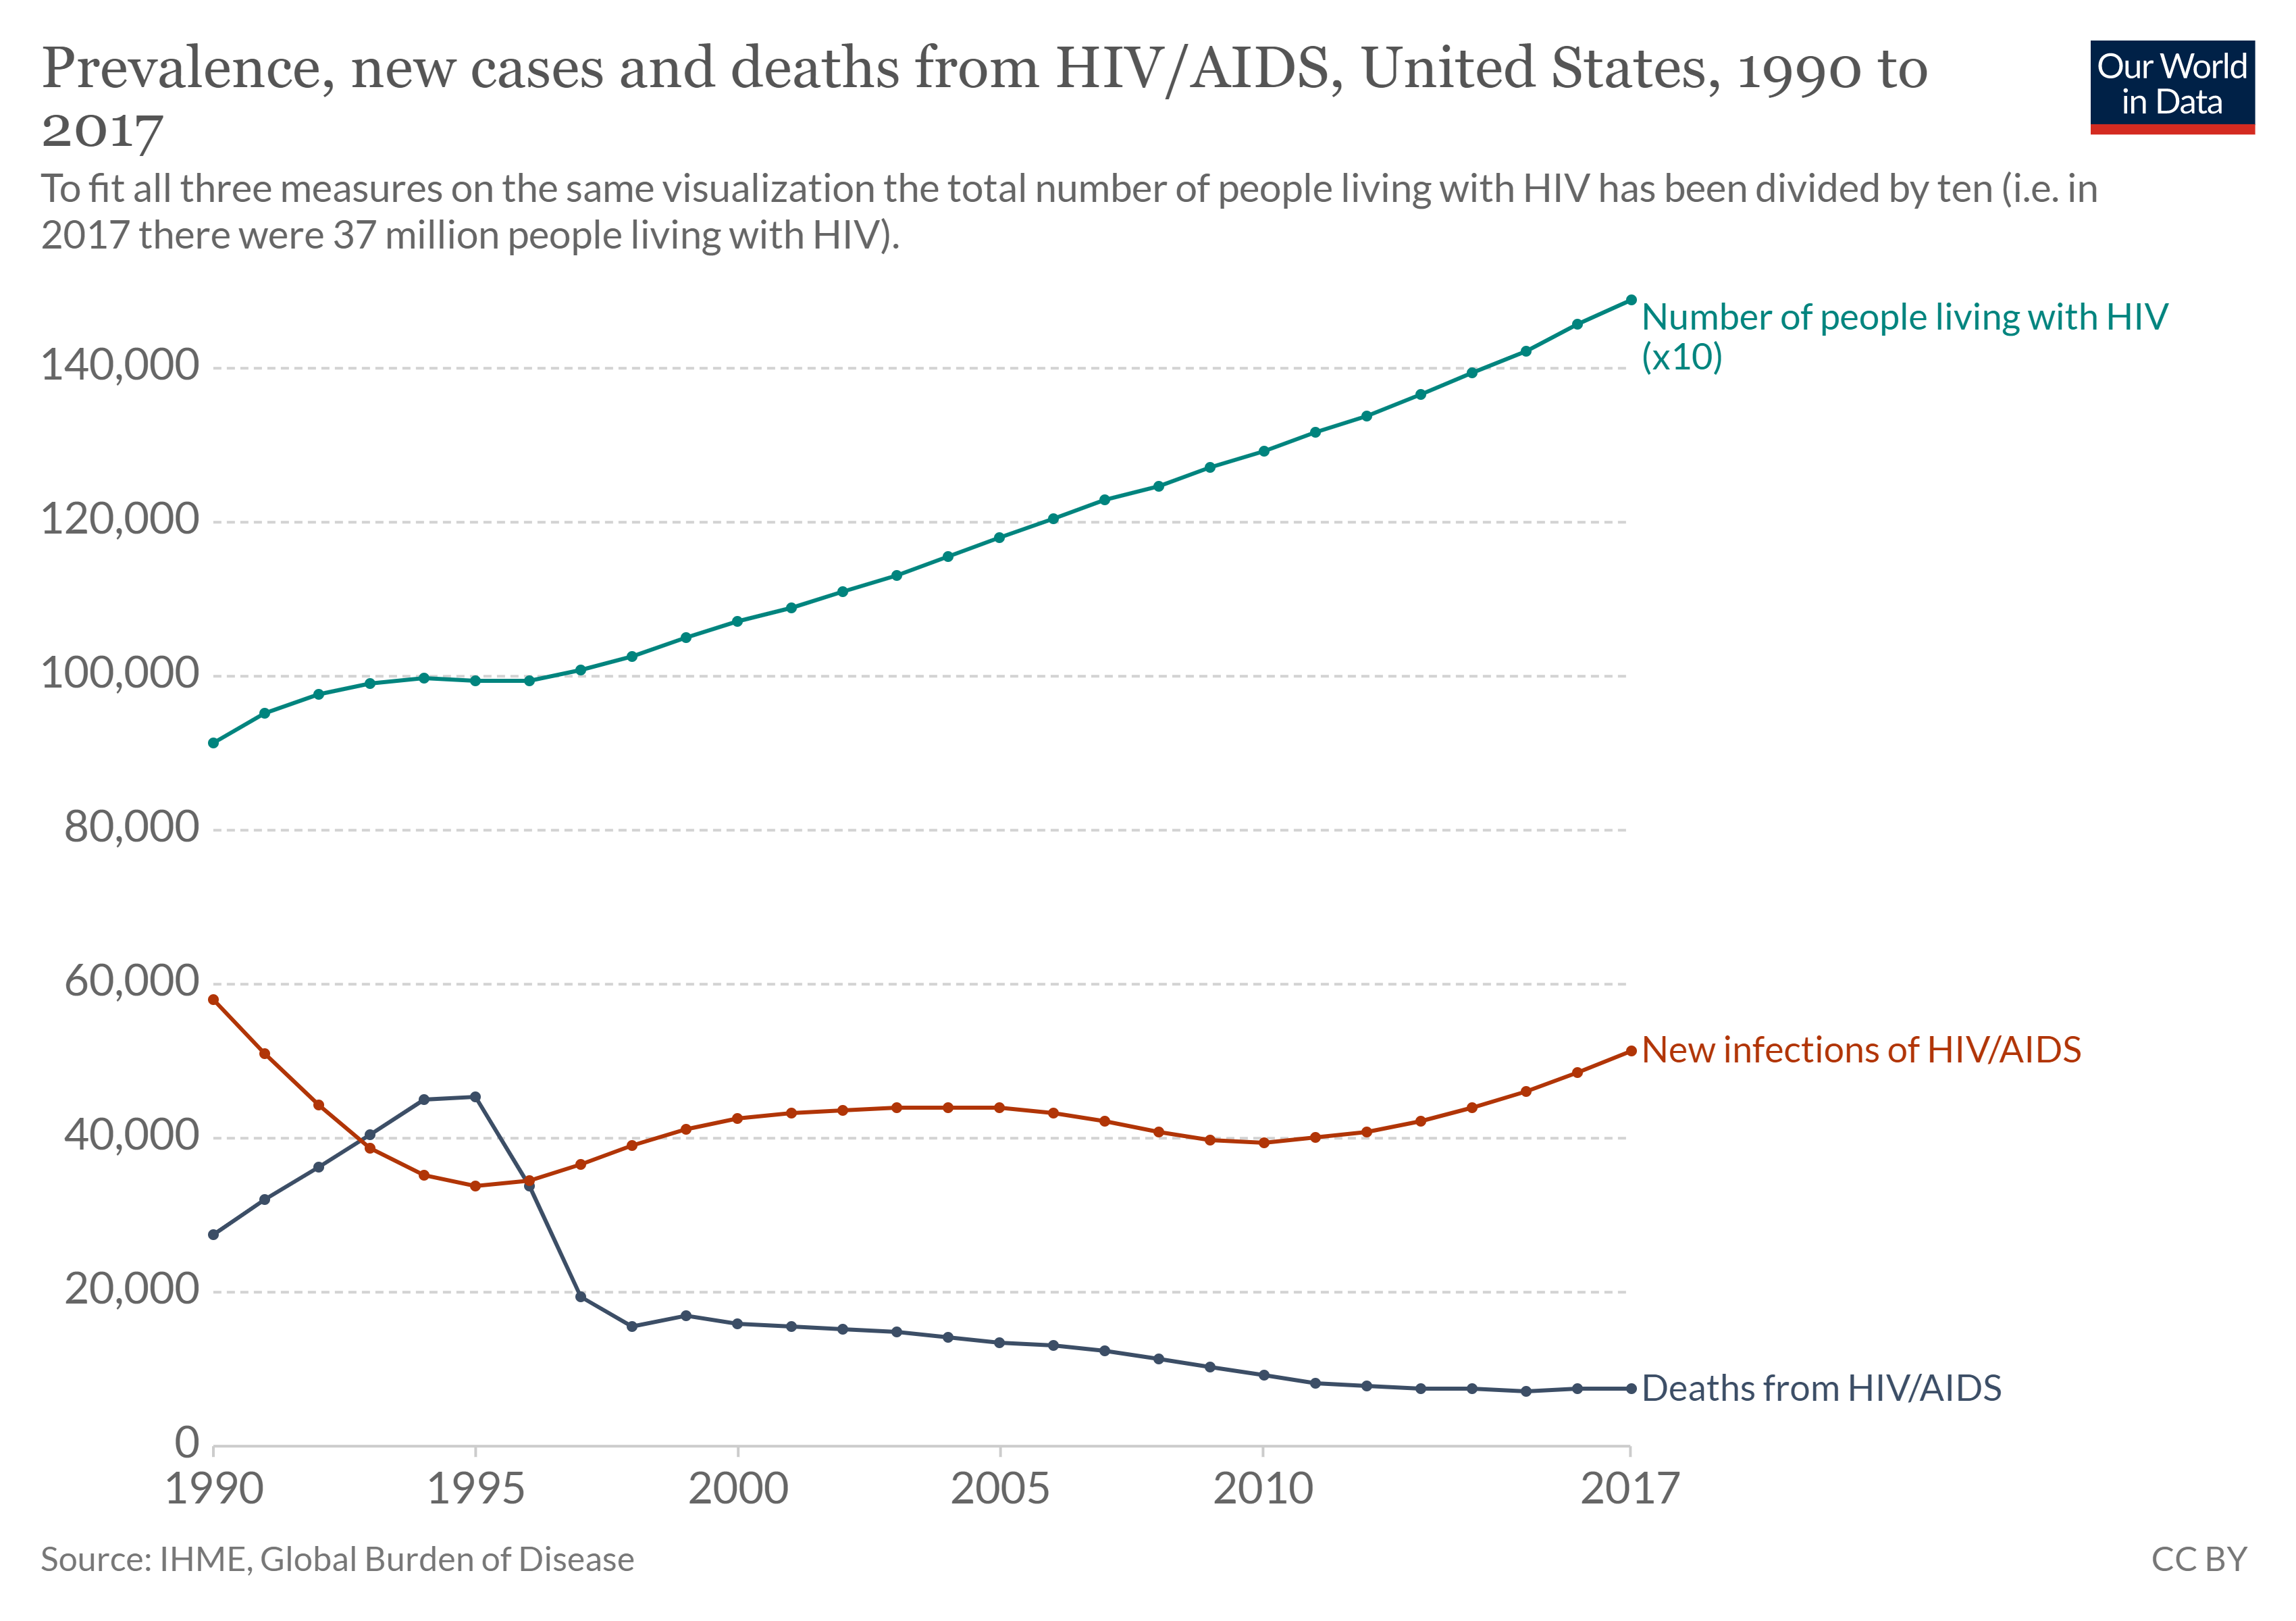 Line graph of HIV prevalence, incidences, and deaths in the United States from 1990 to 2017